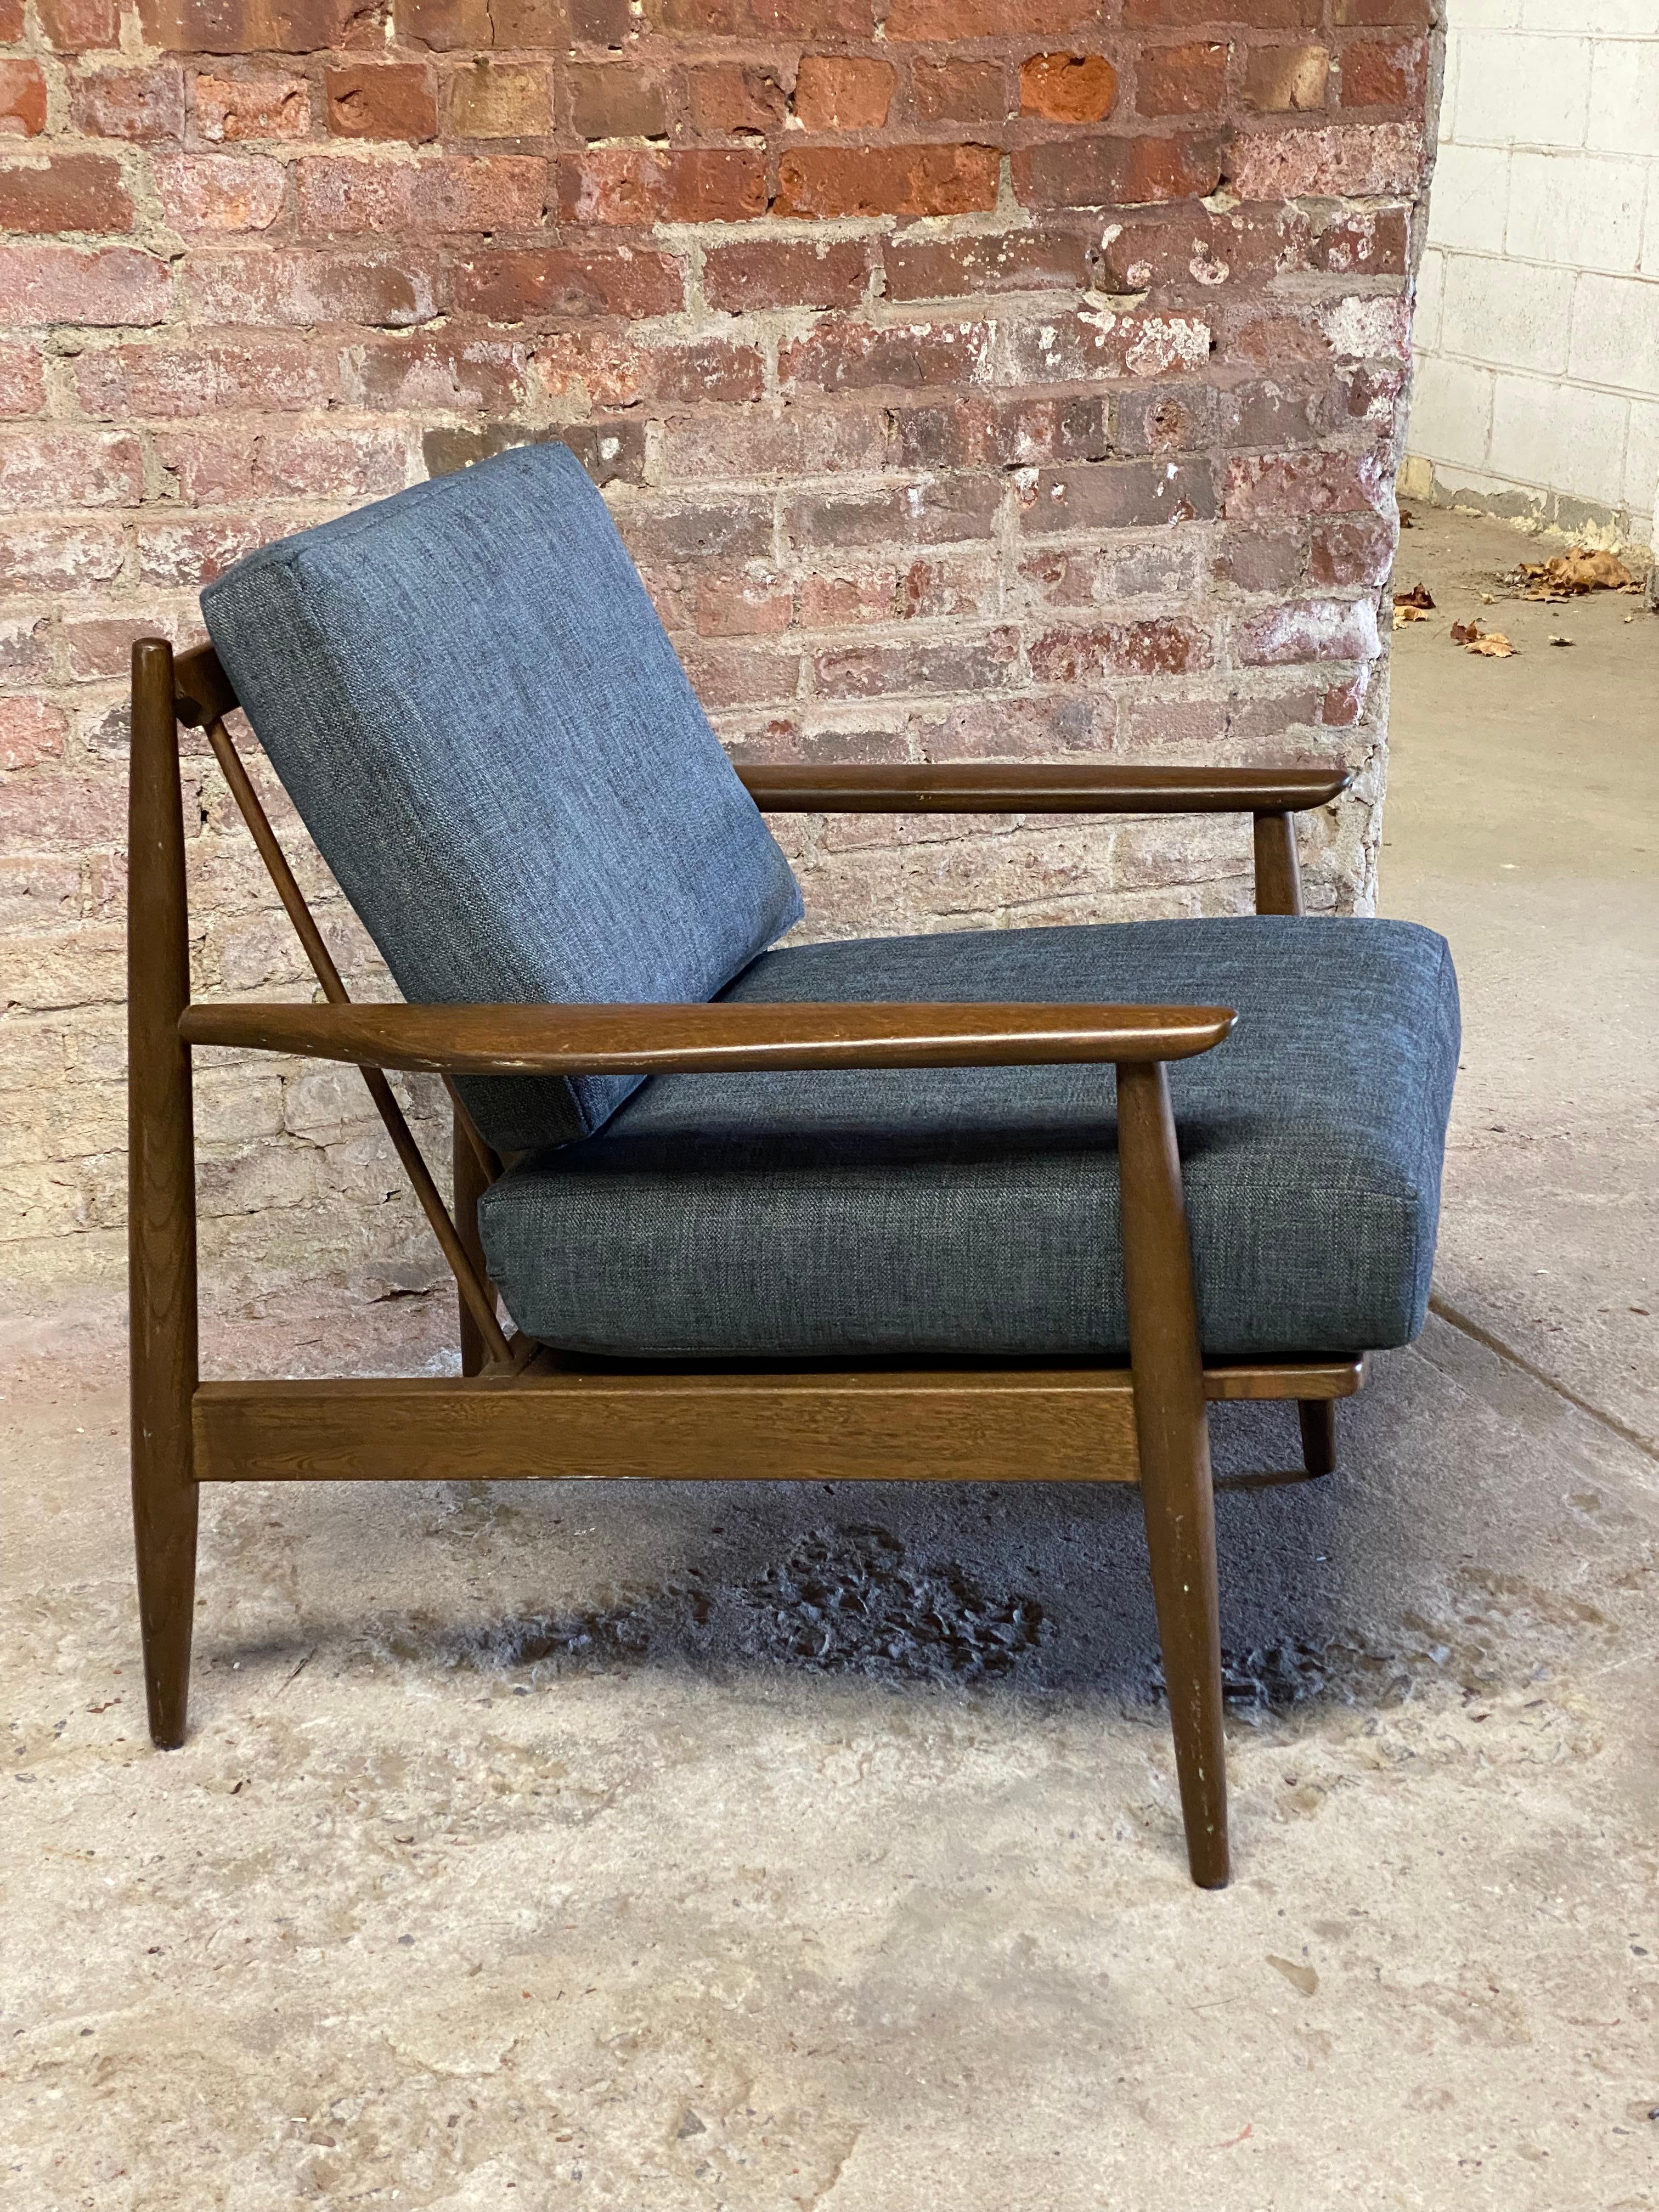 Viko Baumritter flat paddle arm spindle back Mid-Century Modern armchair. subtle design features include the contoured flat paddle arm, angular spindle back, and the nicely shaped and tapered dowel legs. Freshly upholstered a Nanolux gray fabric and